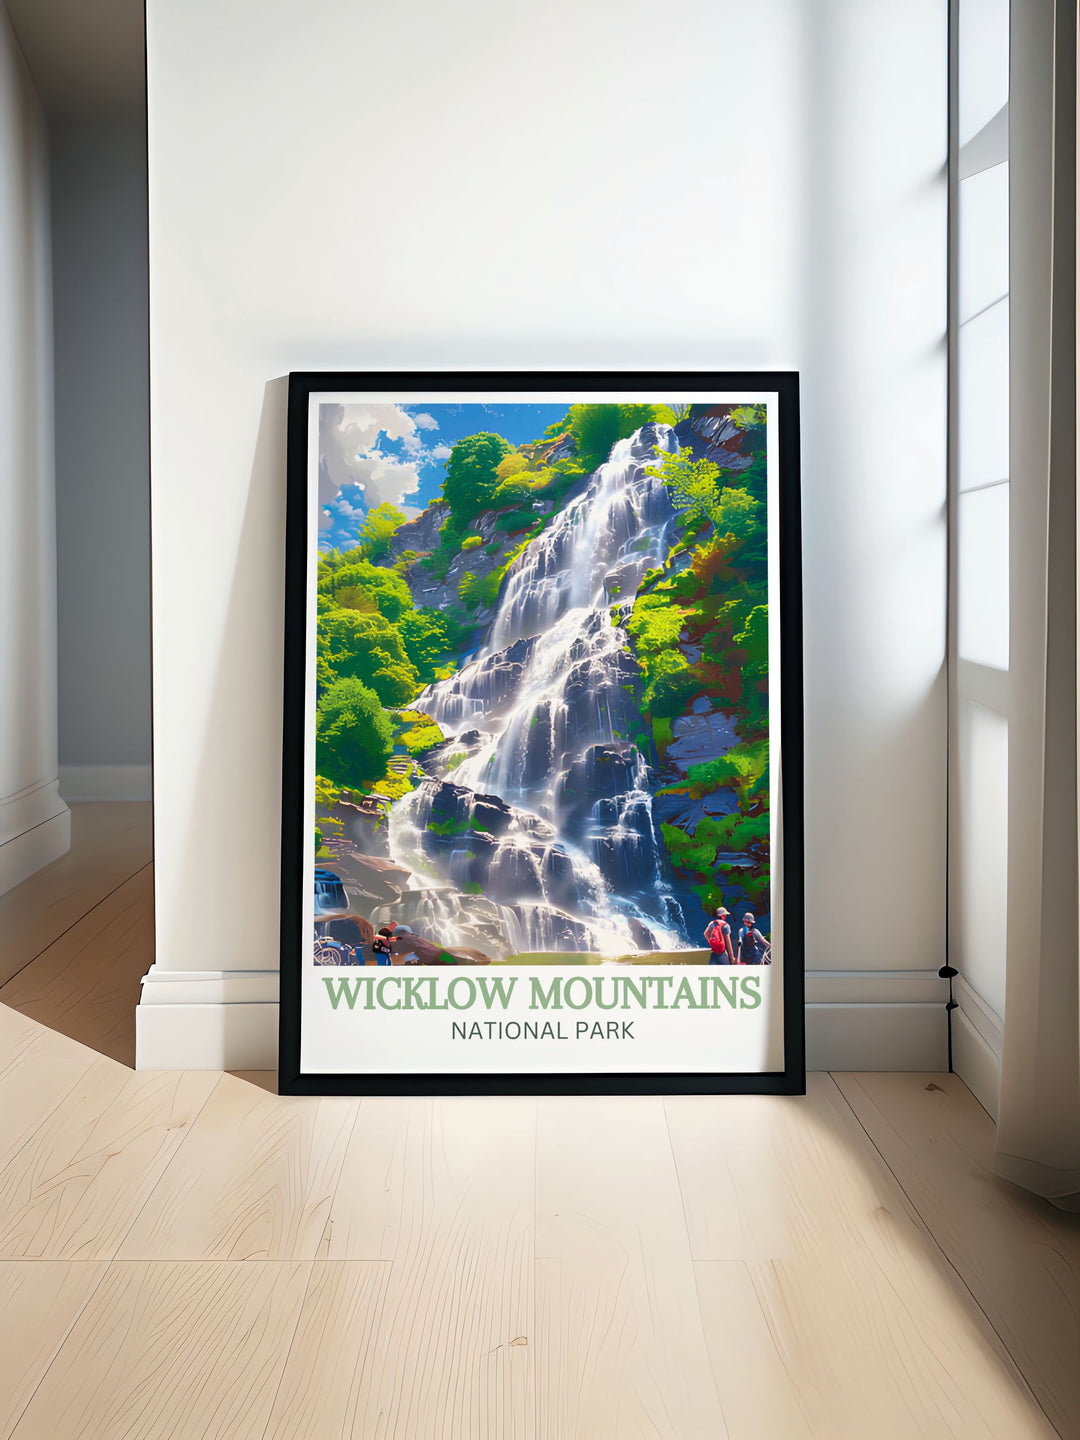 A beautiful fine art print capturing the serene landscapes of Wicklow Mountains National Park in Ireland, showcasing its lush valleys, glacial lakes, and rugged hills. Perfect for nature enthusiasts and those looking to bring a touch of Irish wilderness into their home decor.